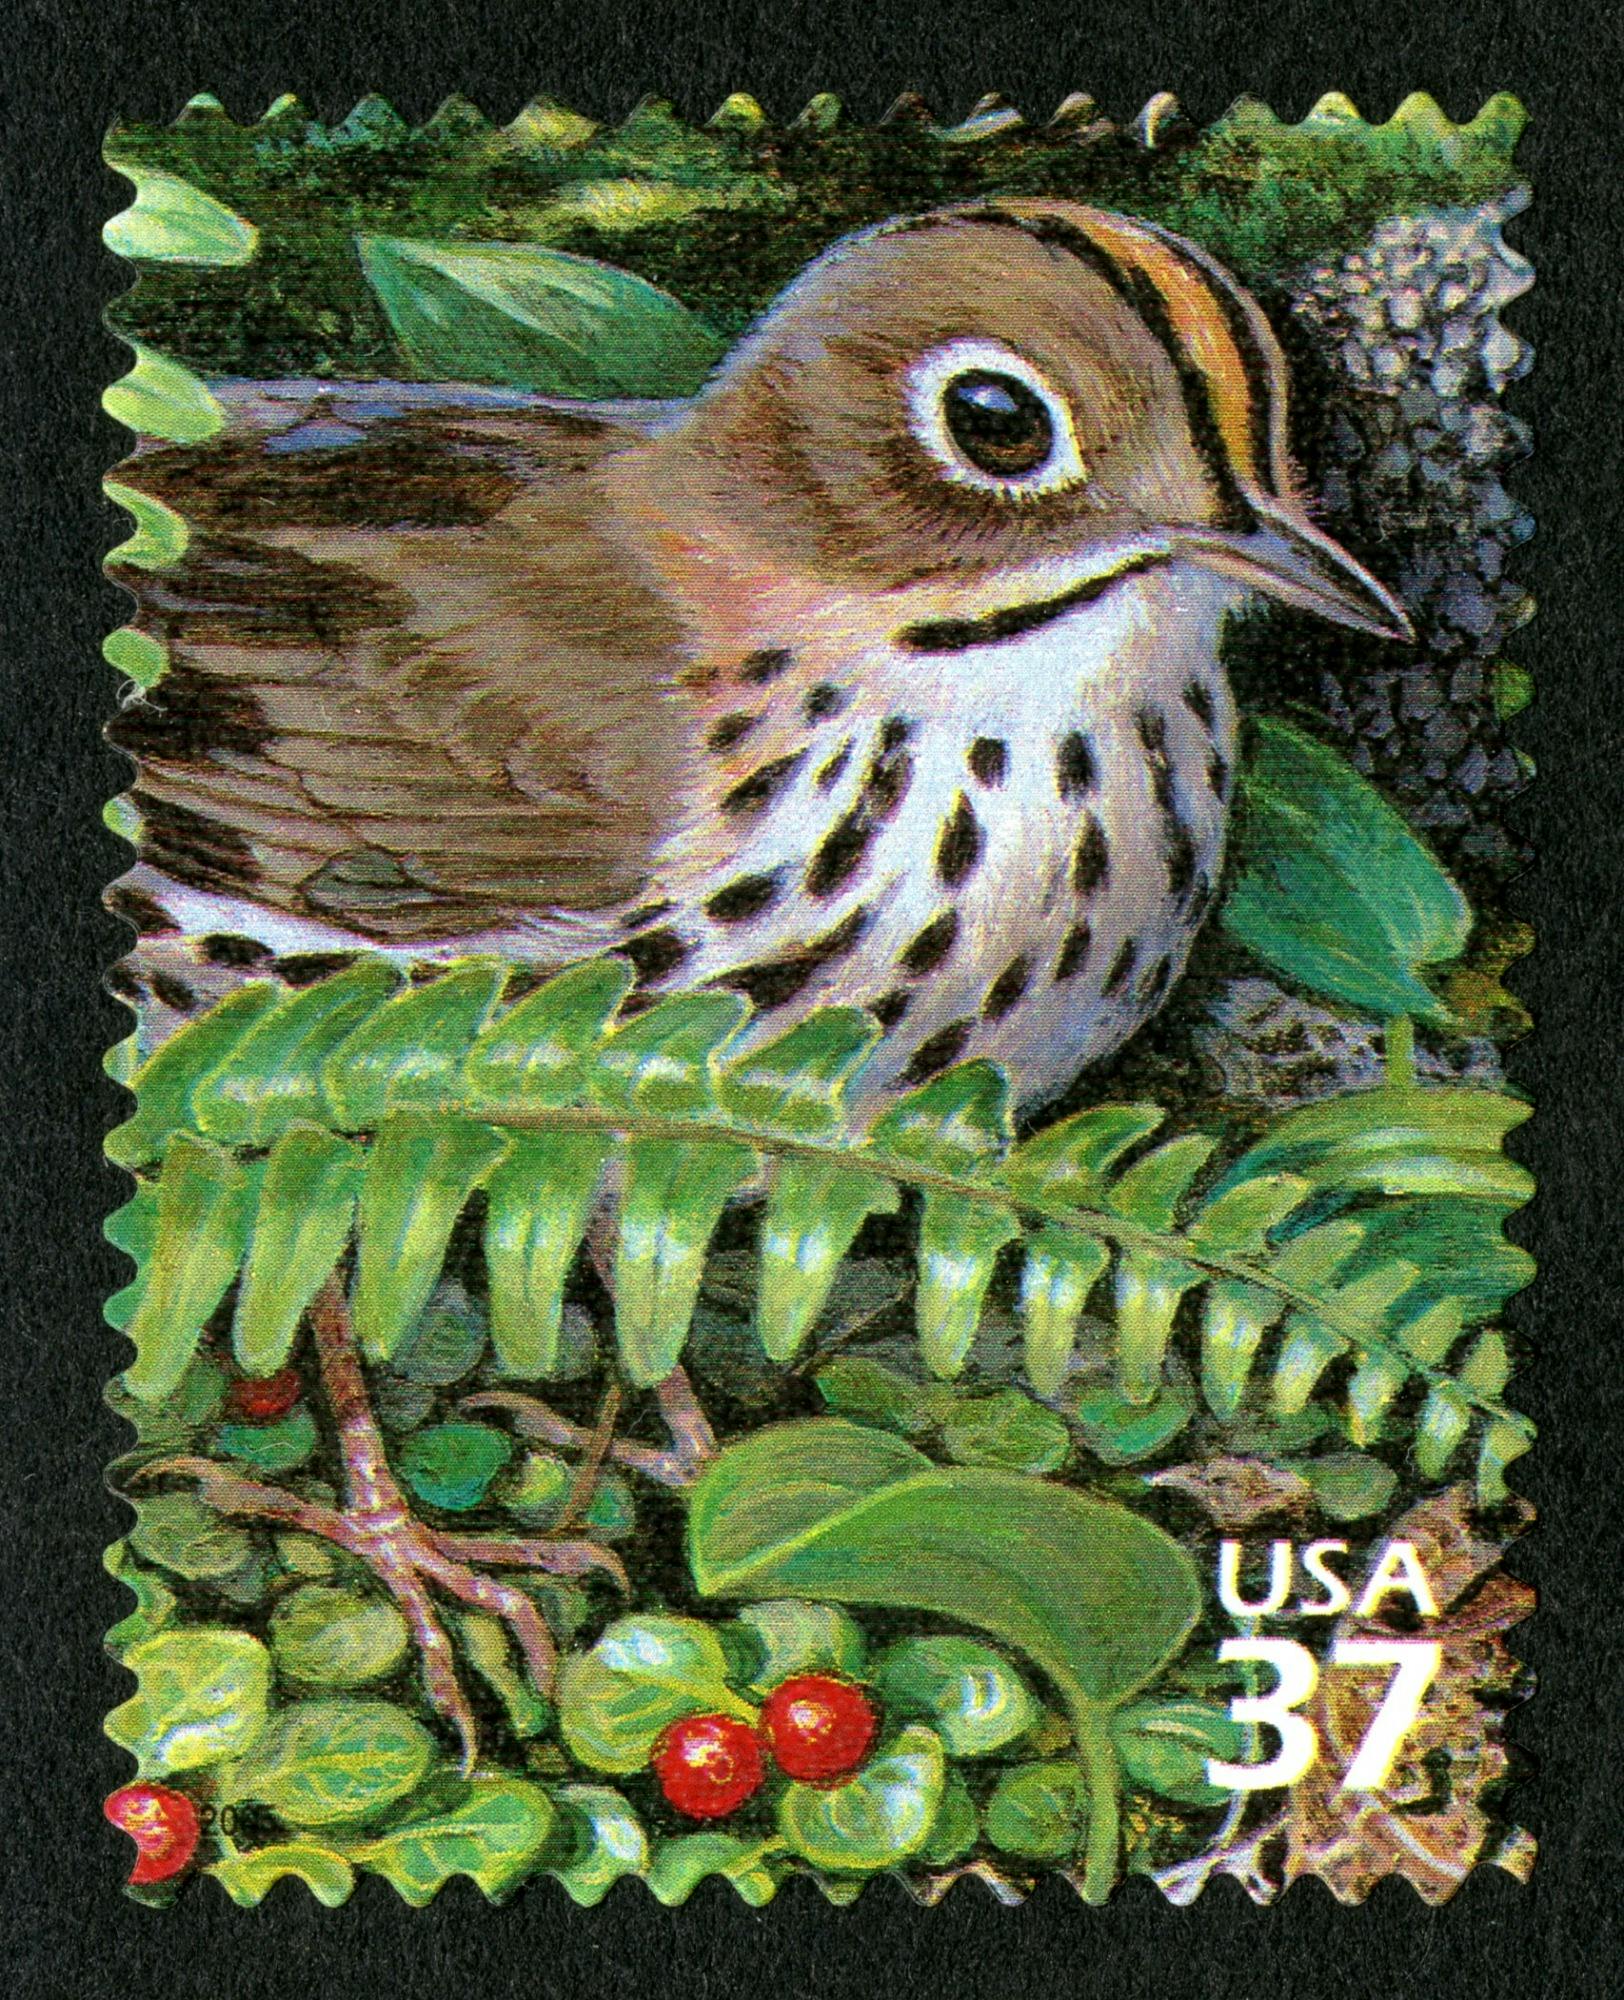 postage stamp showing a brown bird with white chest and black dots and striping standing among ferns, leaves, and red berries. Text reads: "USA 37"